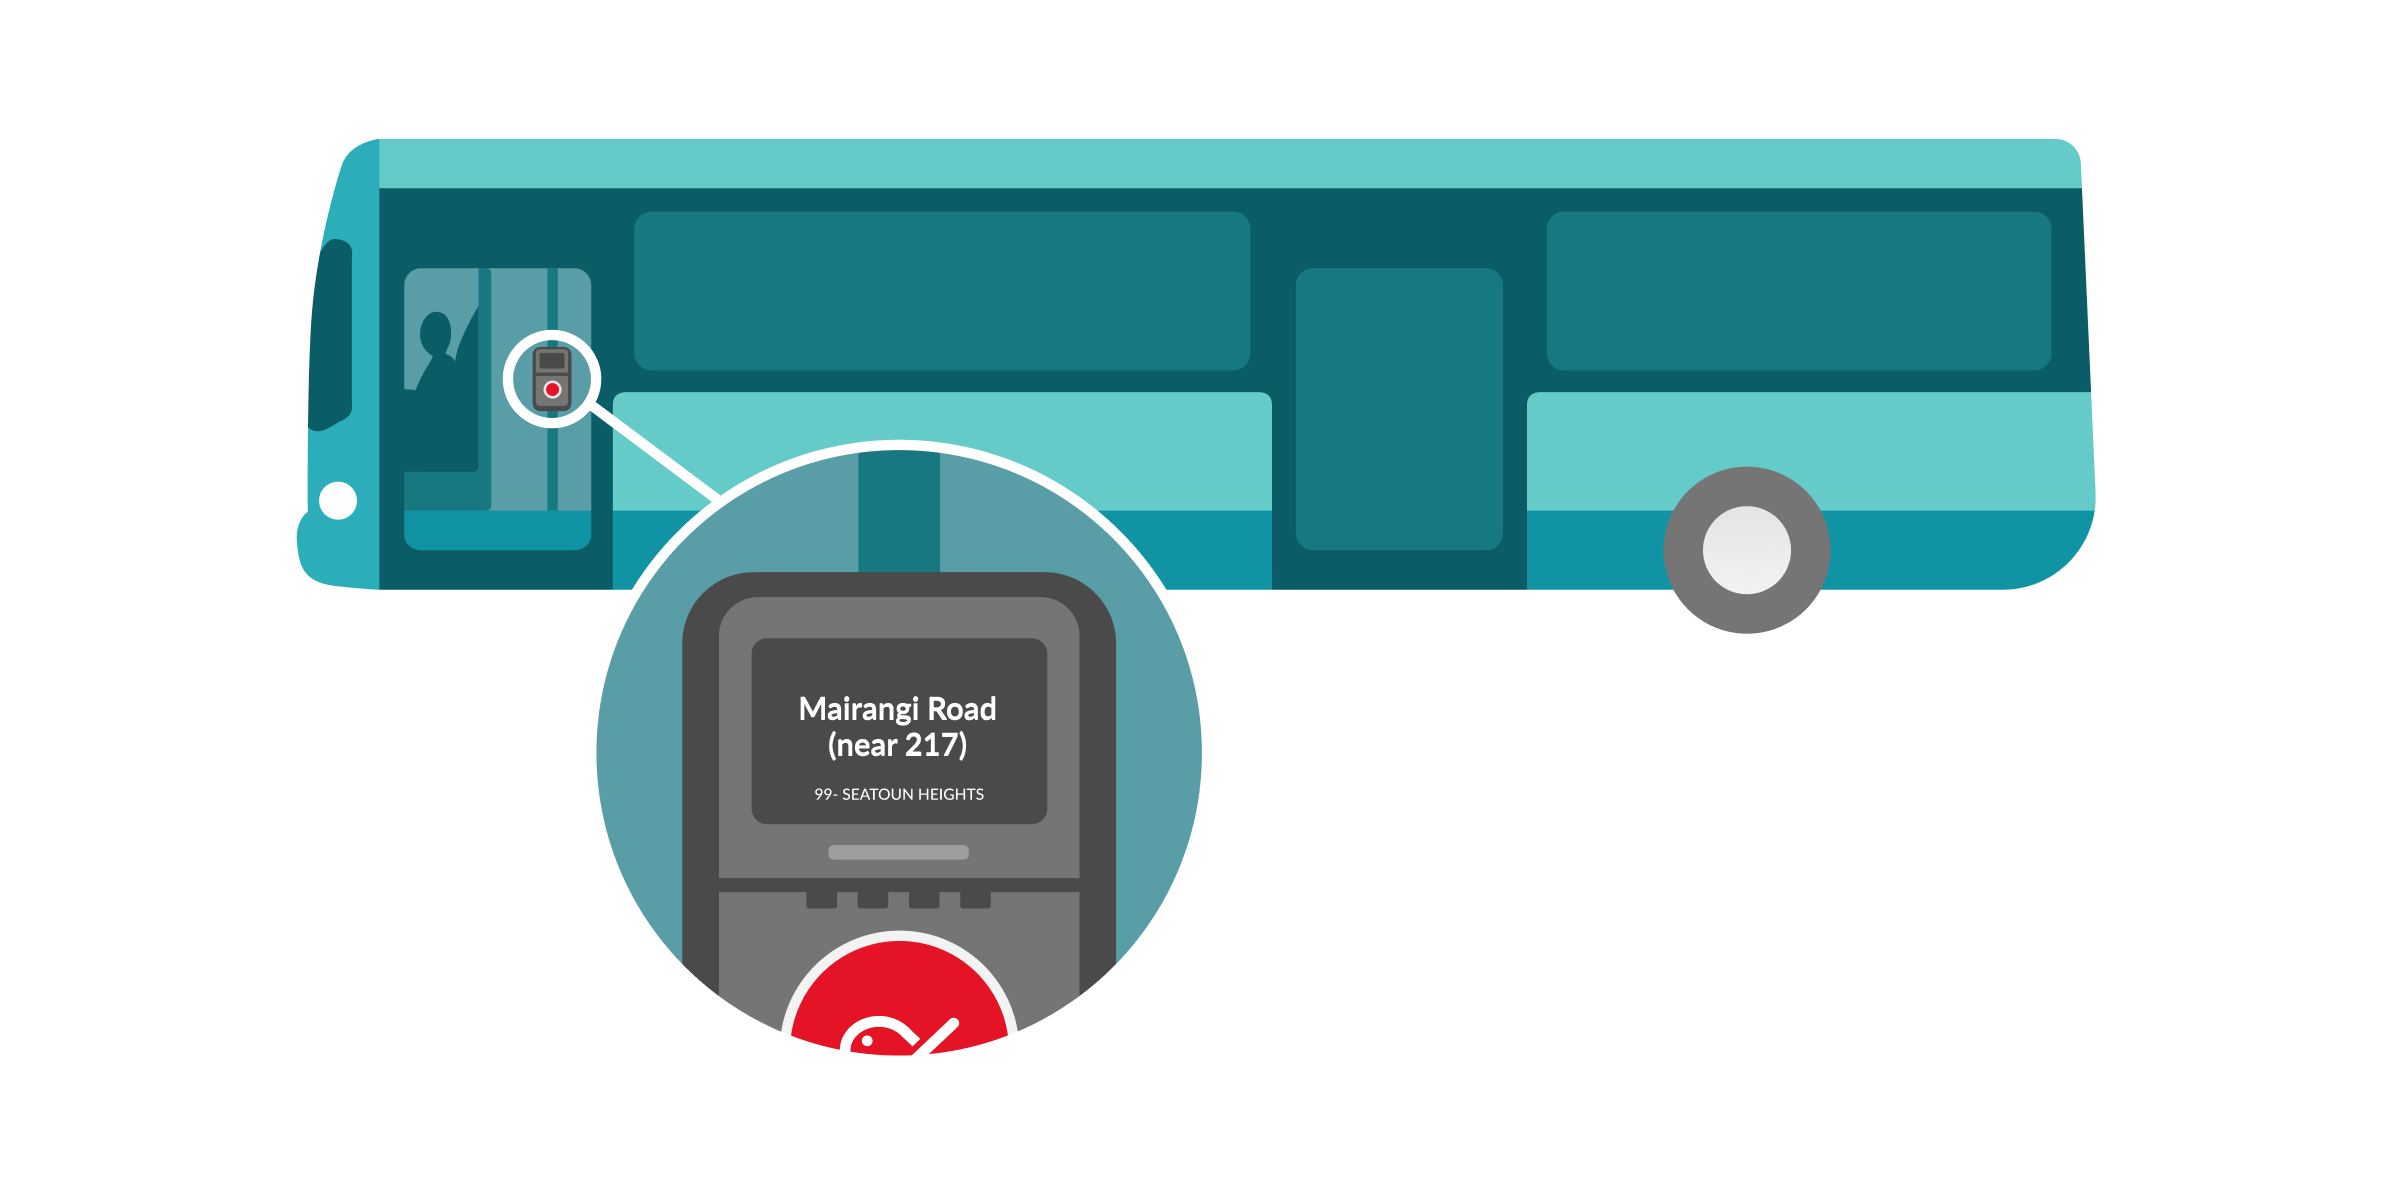 Image of a bus showing the Snapper card reader